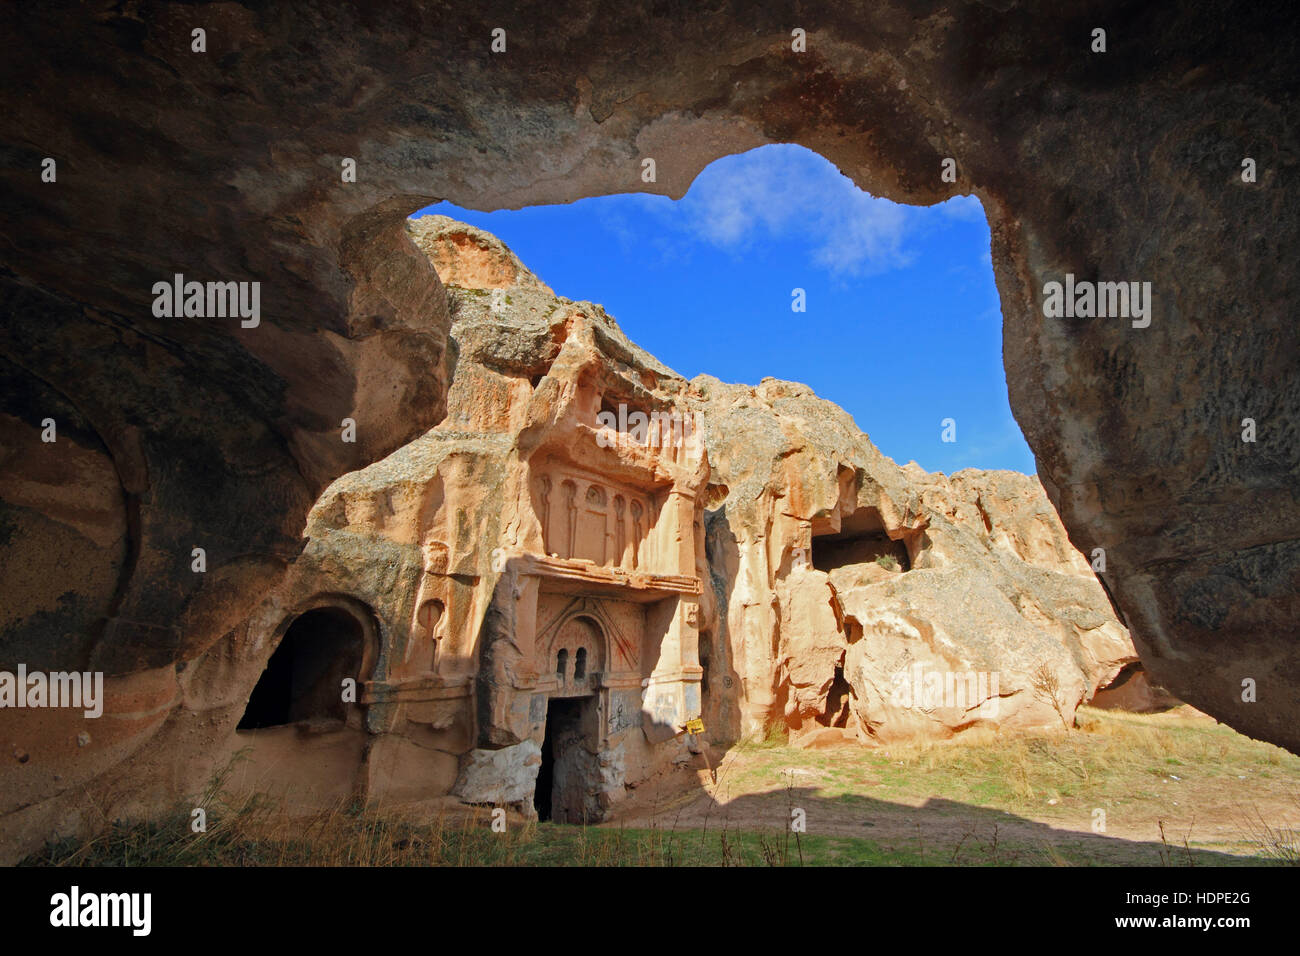 Old monastery carved out of the rock, in historical site known as Open Palace or Acik Saray in Cappadocia, Turkey. Stock Photo